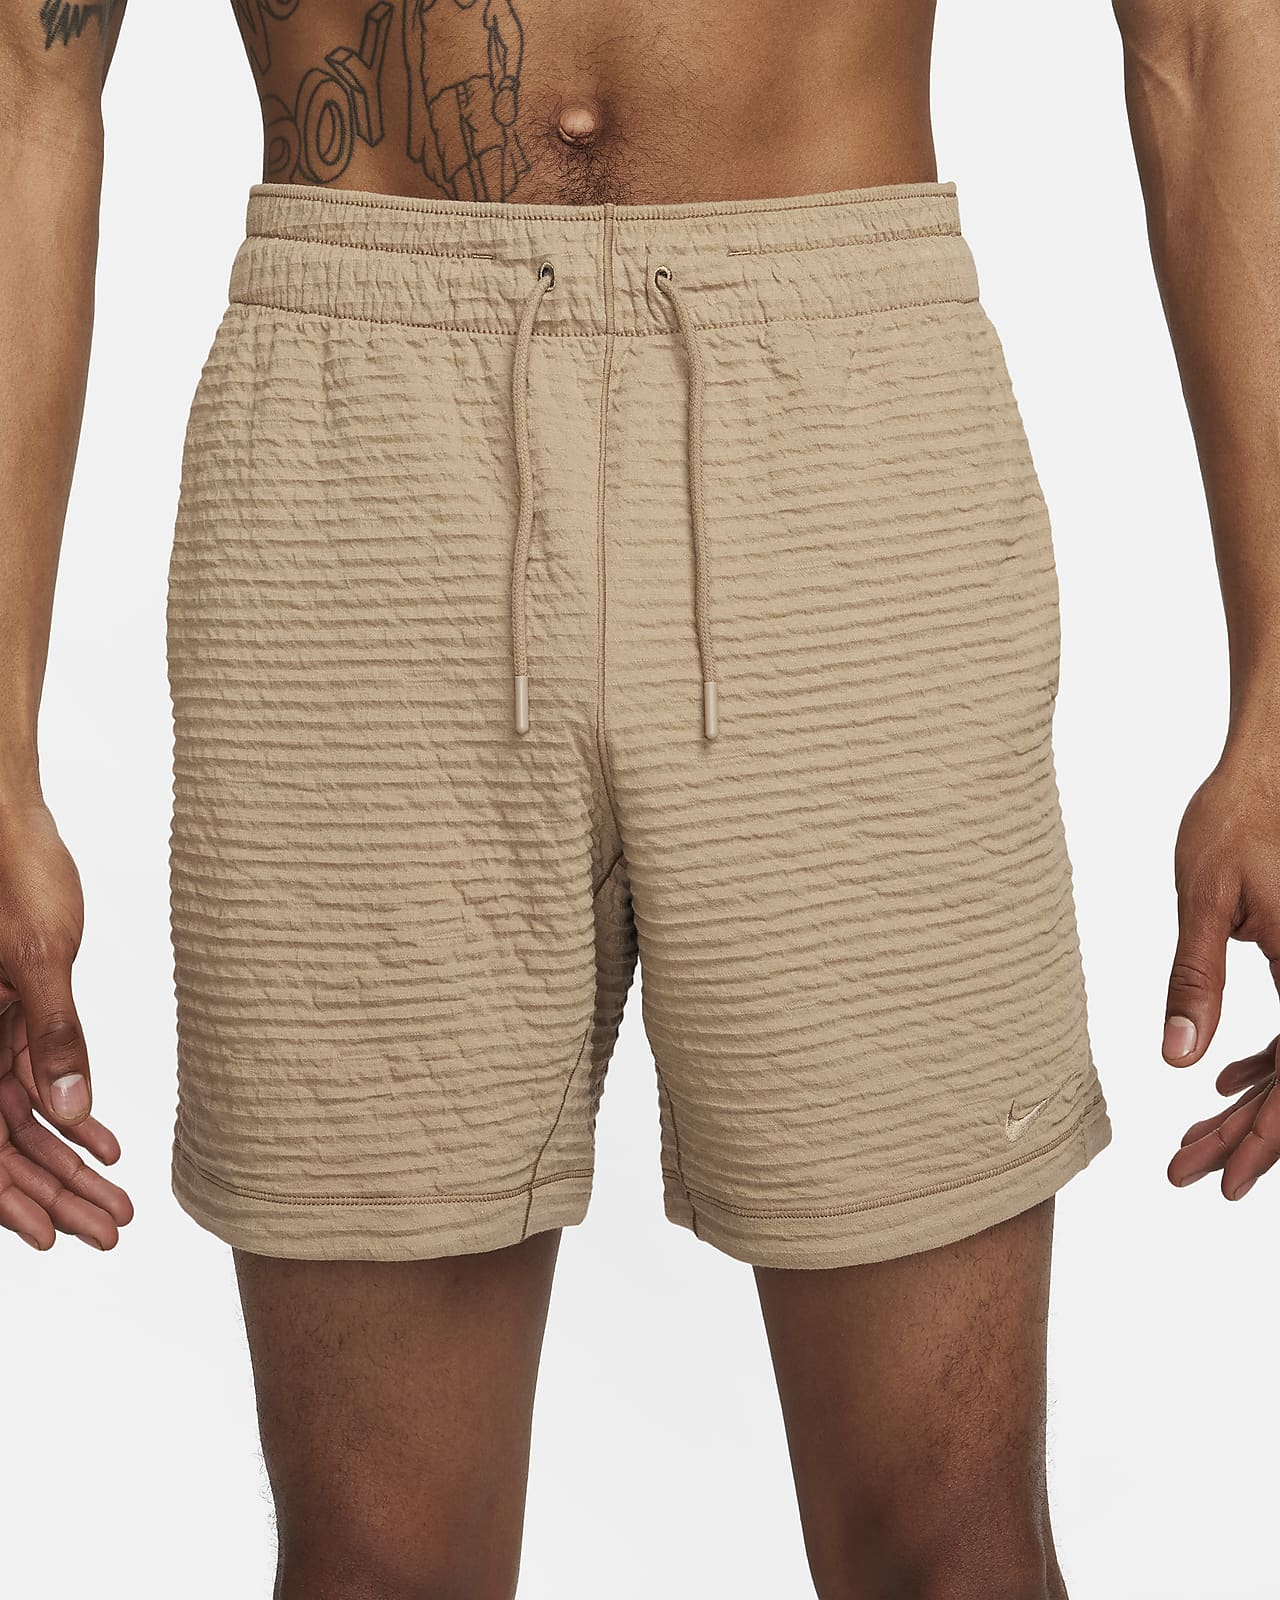 Nike Yoga Luxe 7 Short in Light Army & Stone